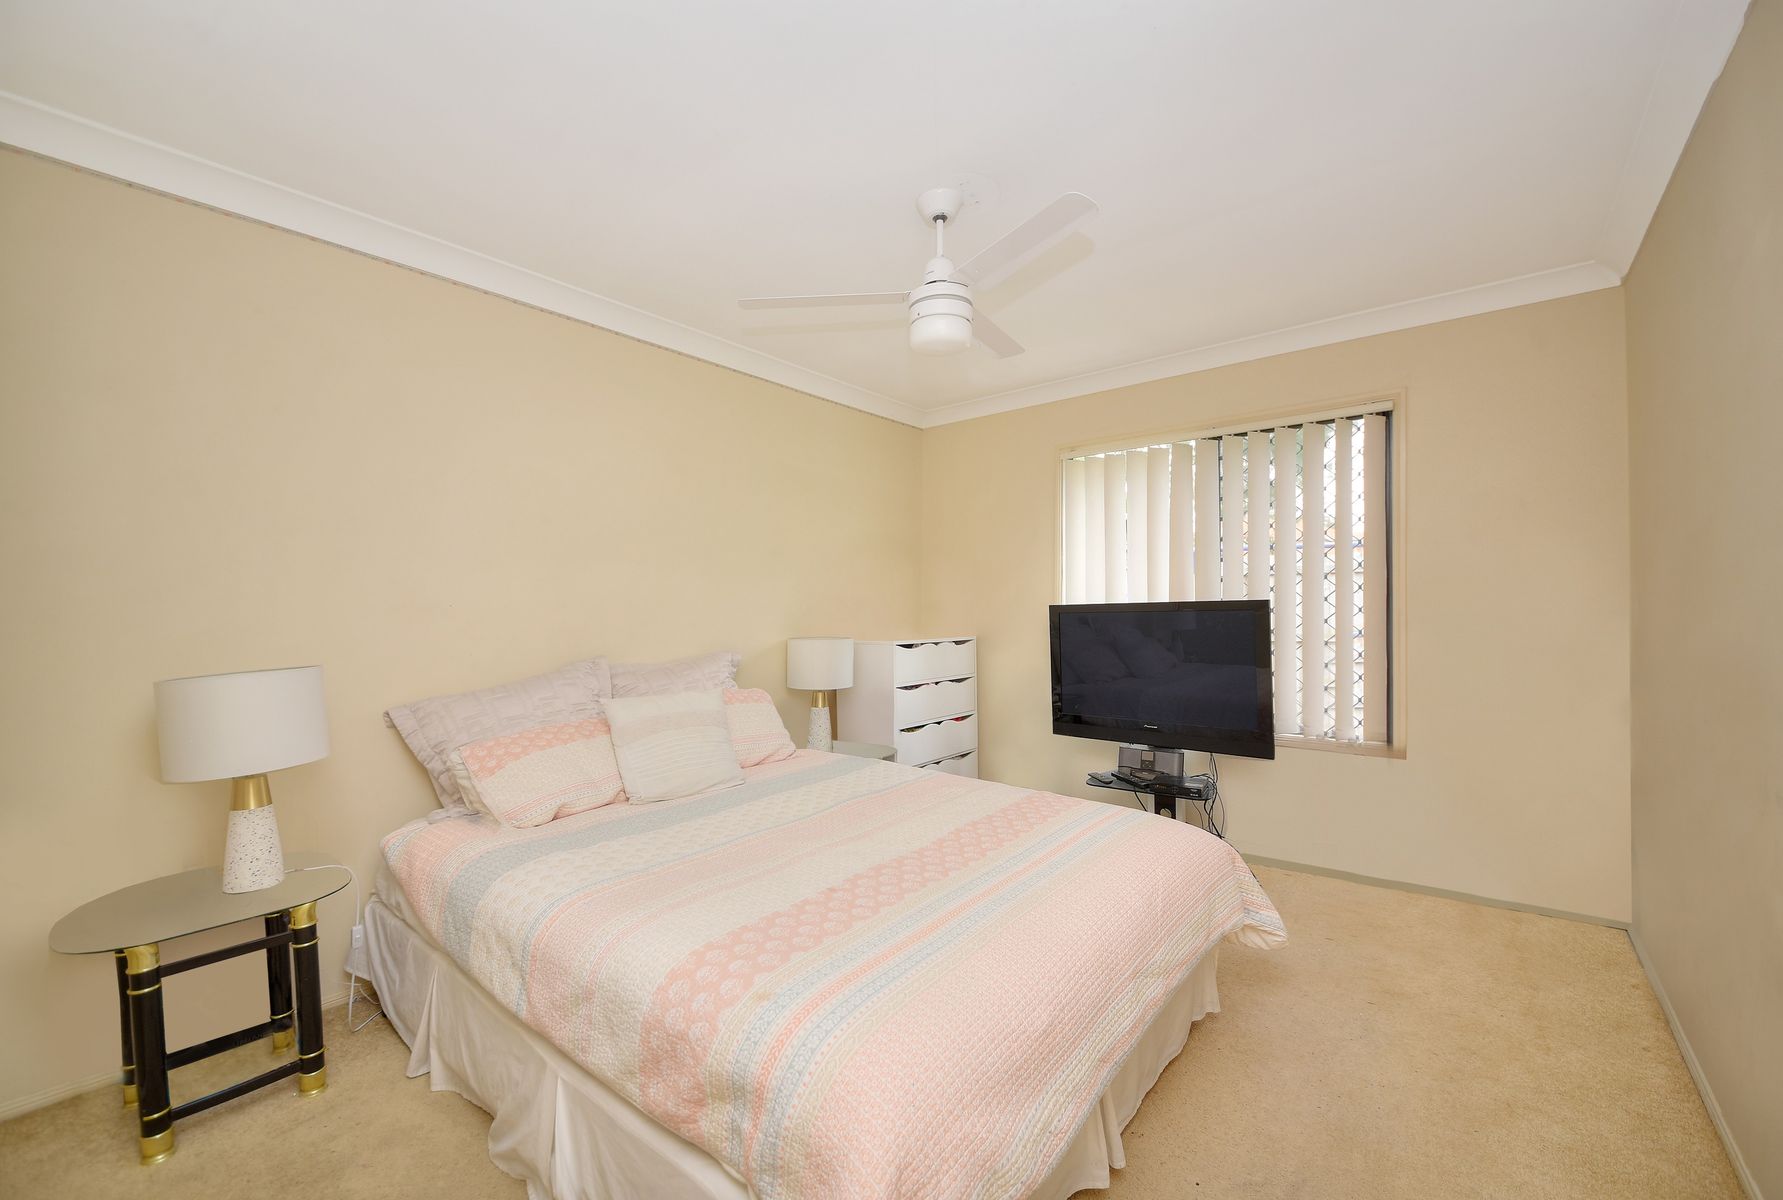 17 19 Yaun st Coomera Alessia Tang Area Specialist 1